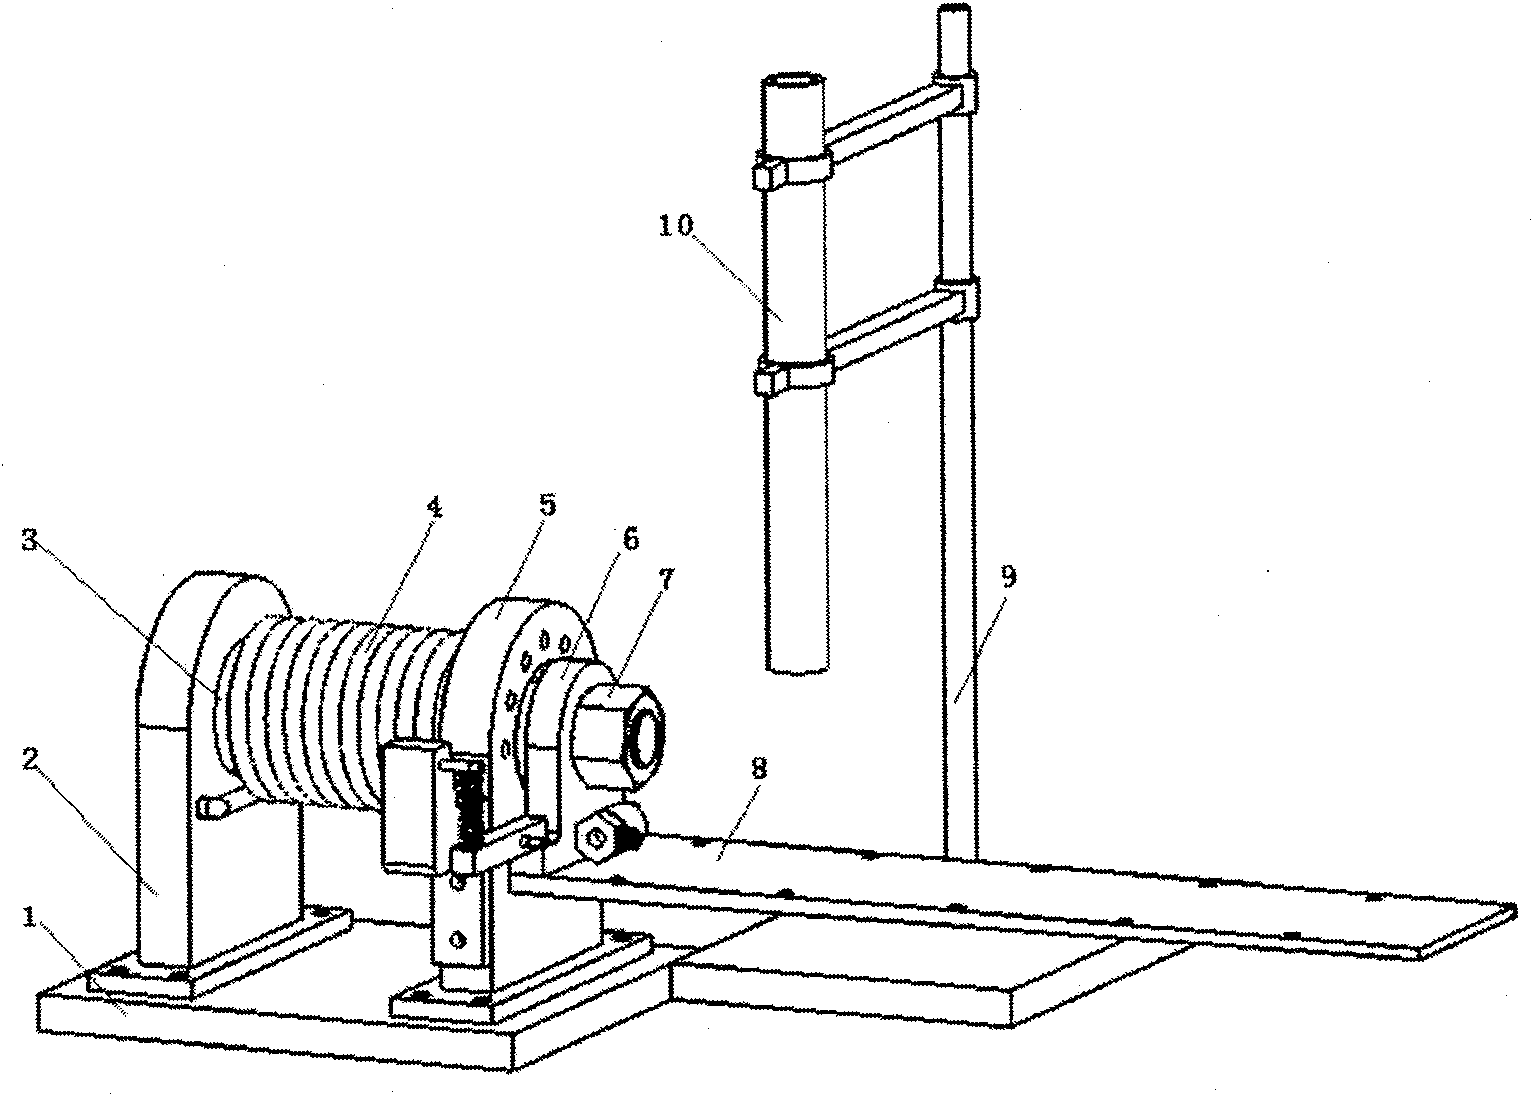 Damaging apparatus for diffuse shaft cable damage experiment